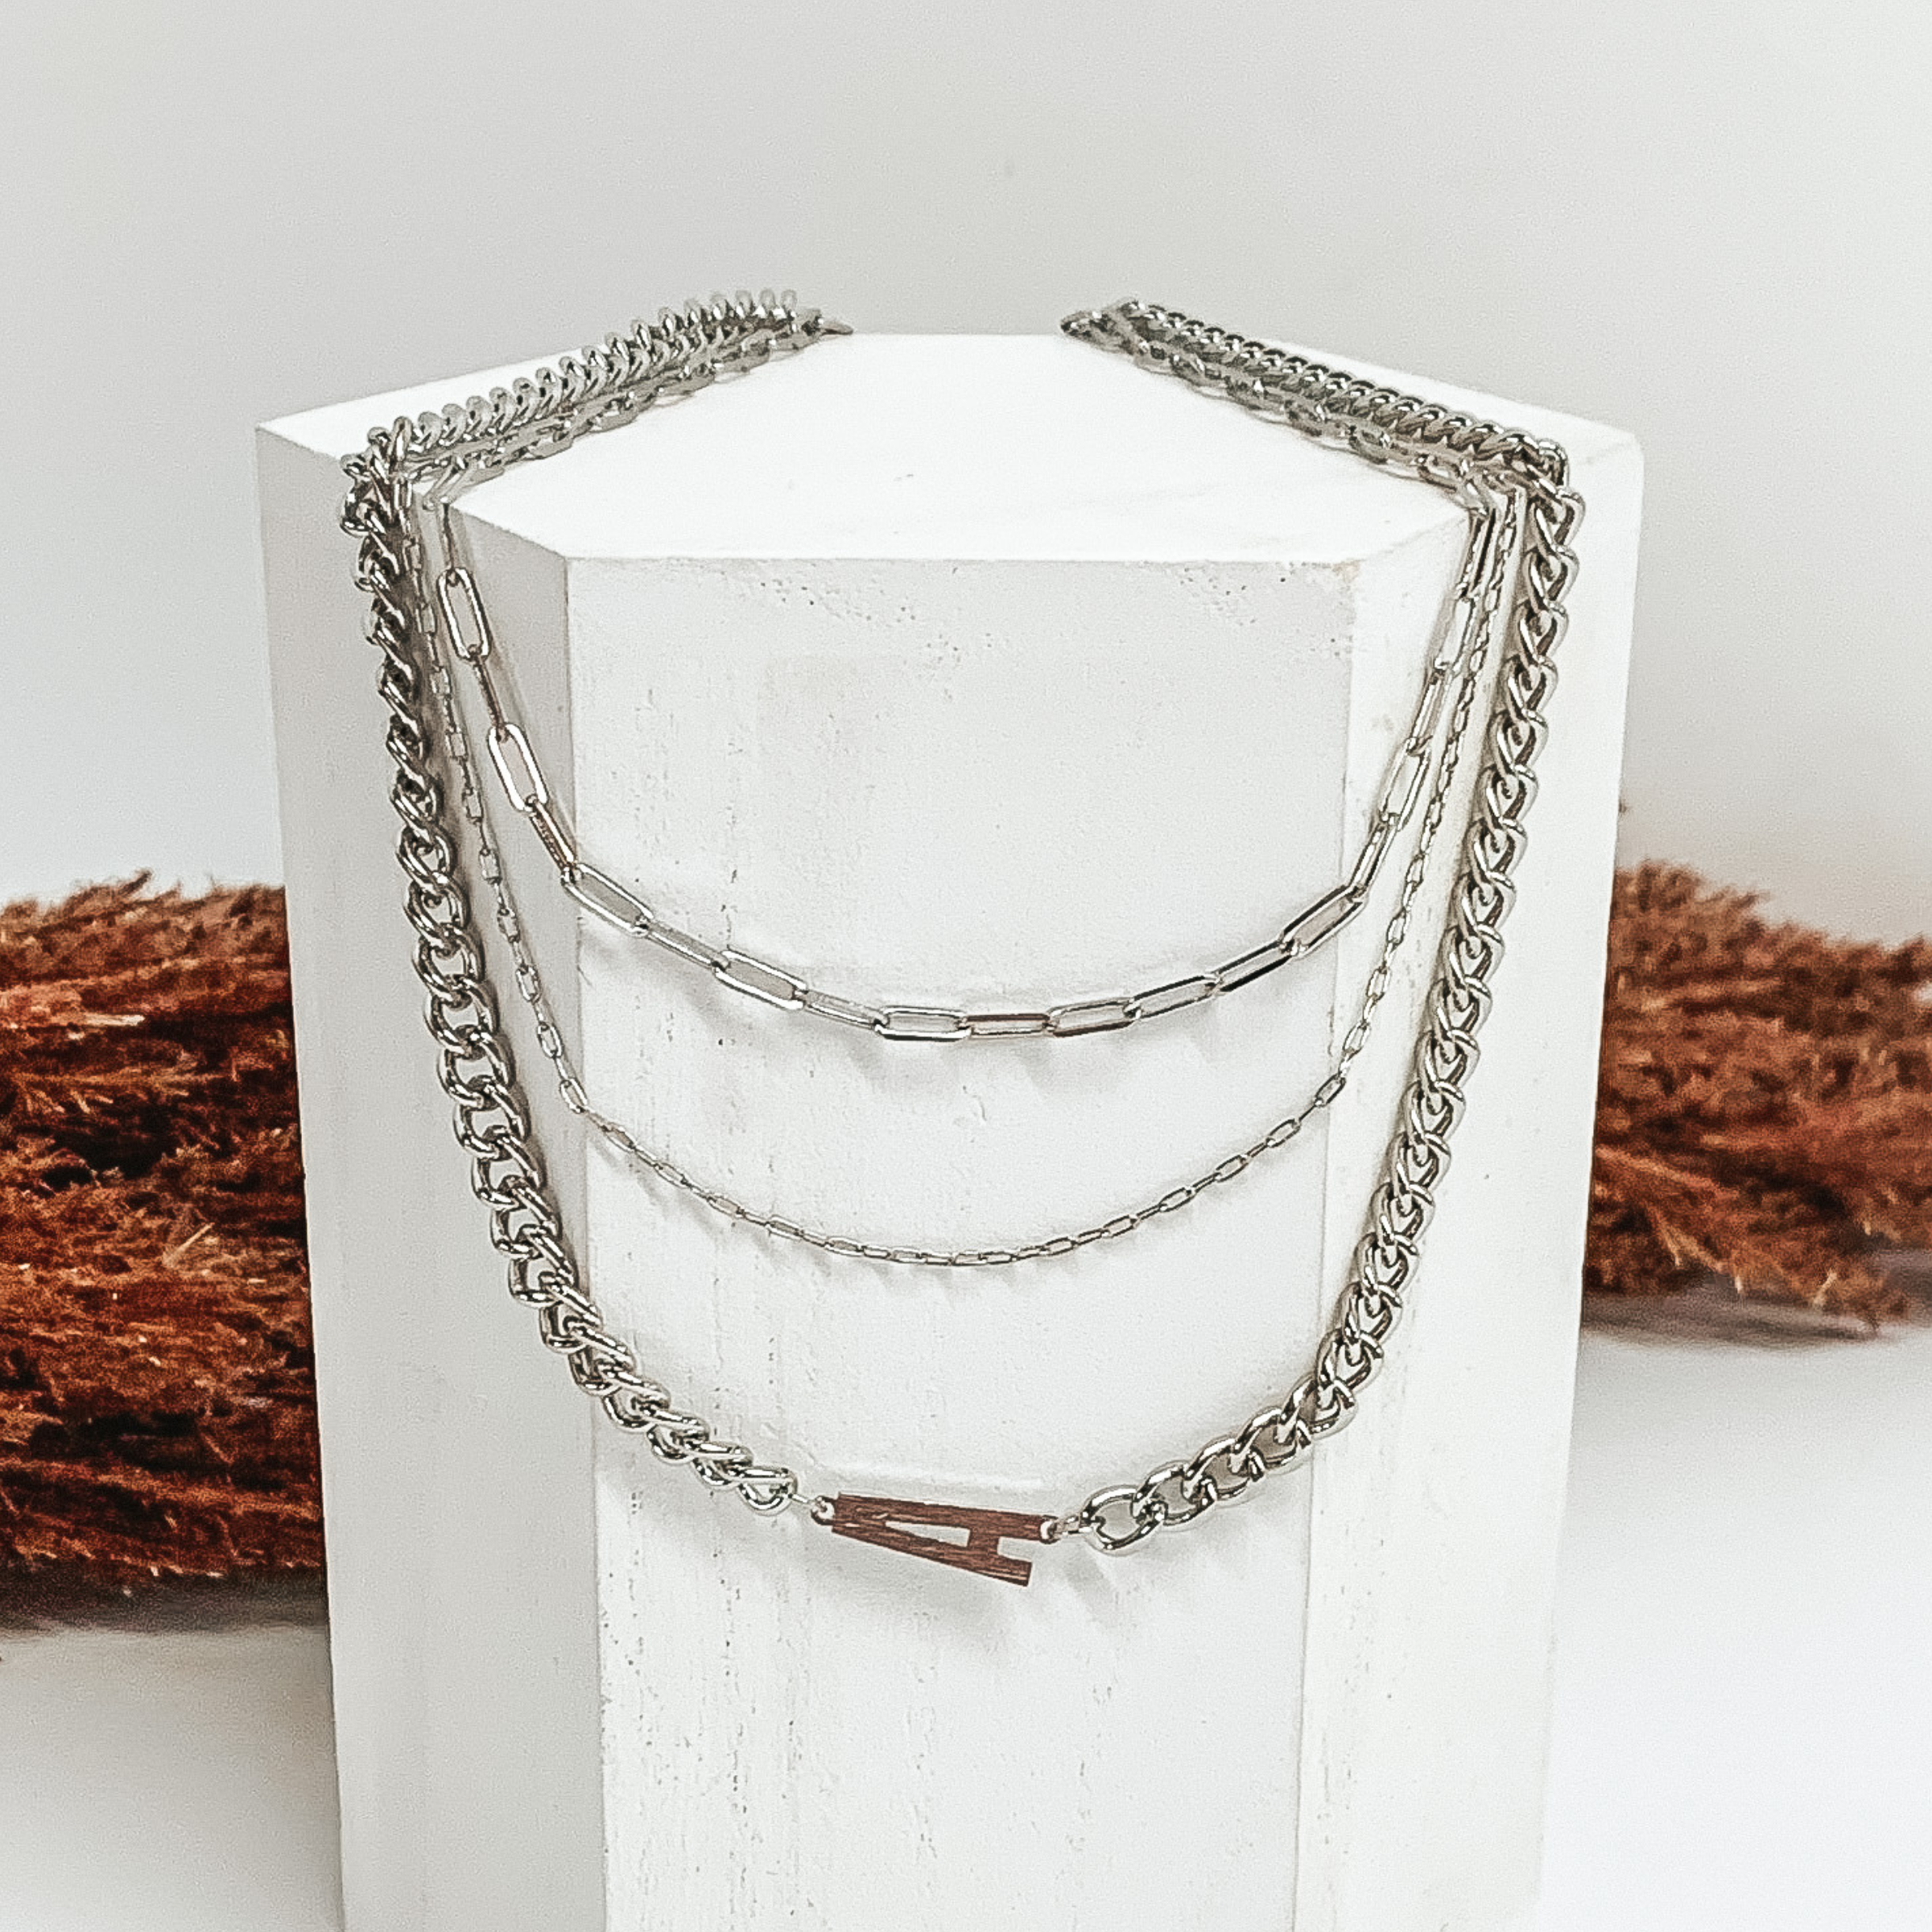 Initial Multi Chained Necklace Set in Silver - Giddy Up Glamour Boutique